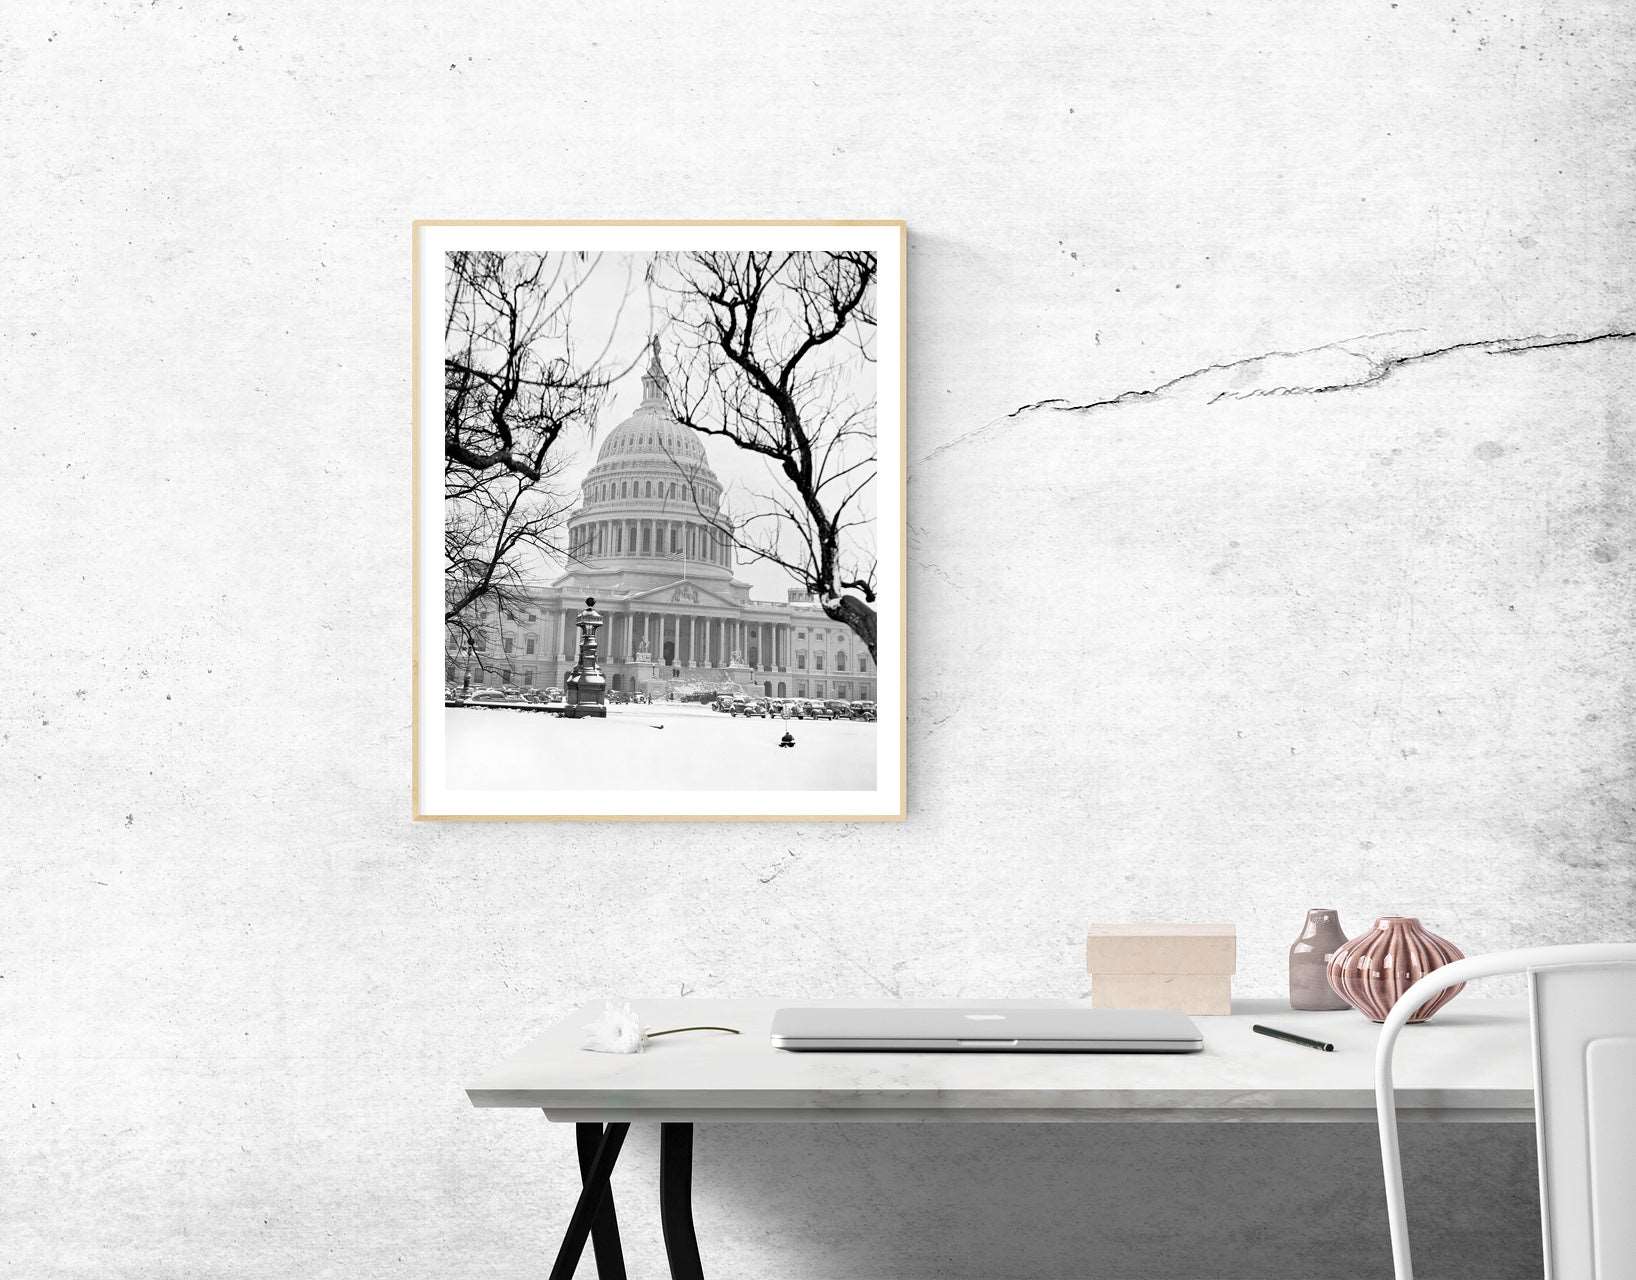 A framed print reproduction of a vintage photograph of the US Capitol in winter